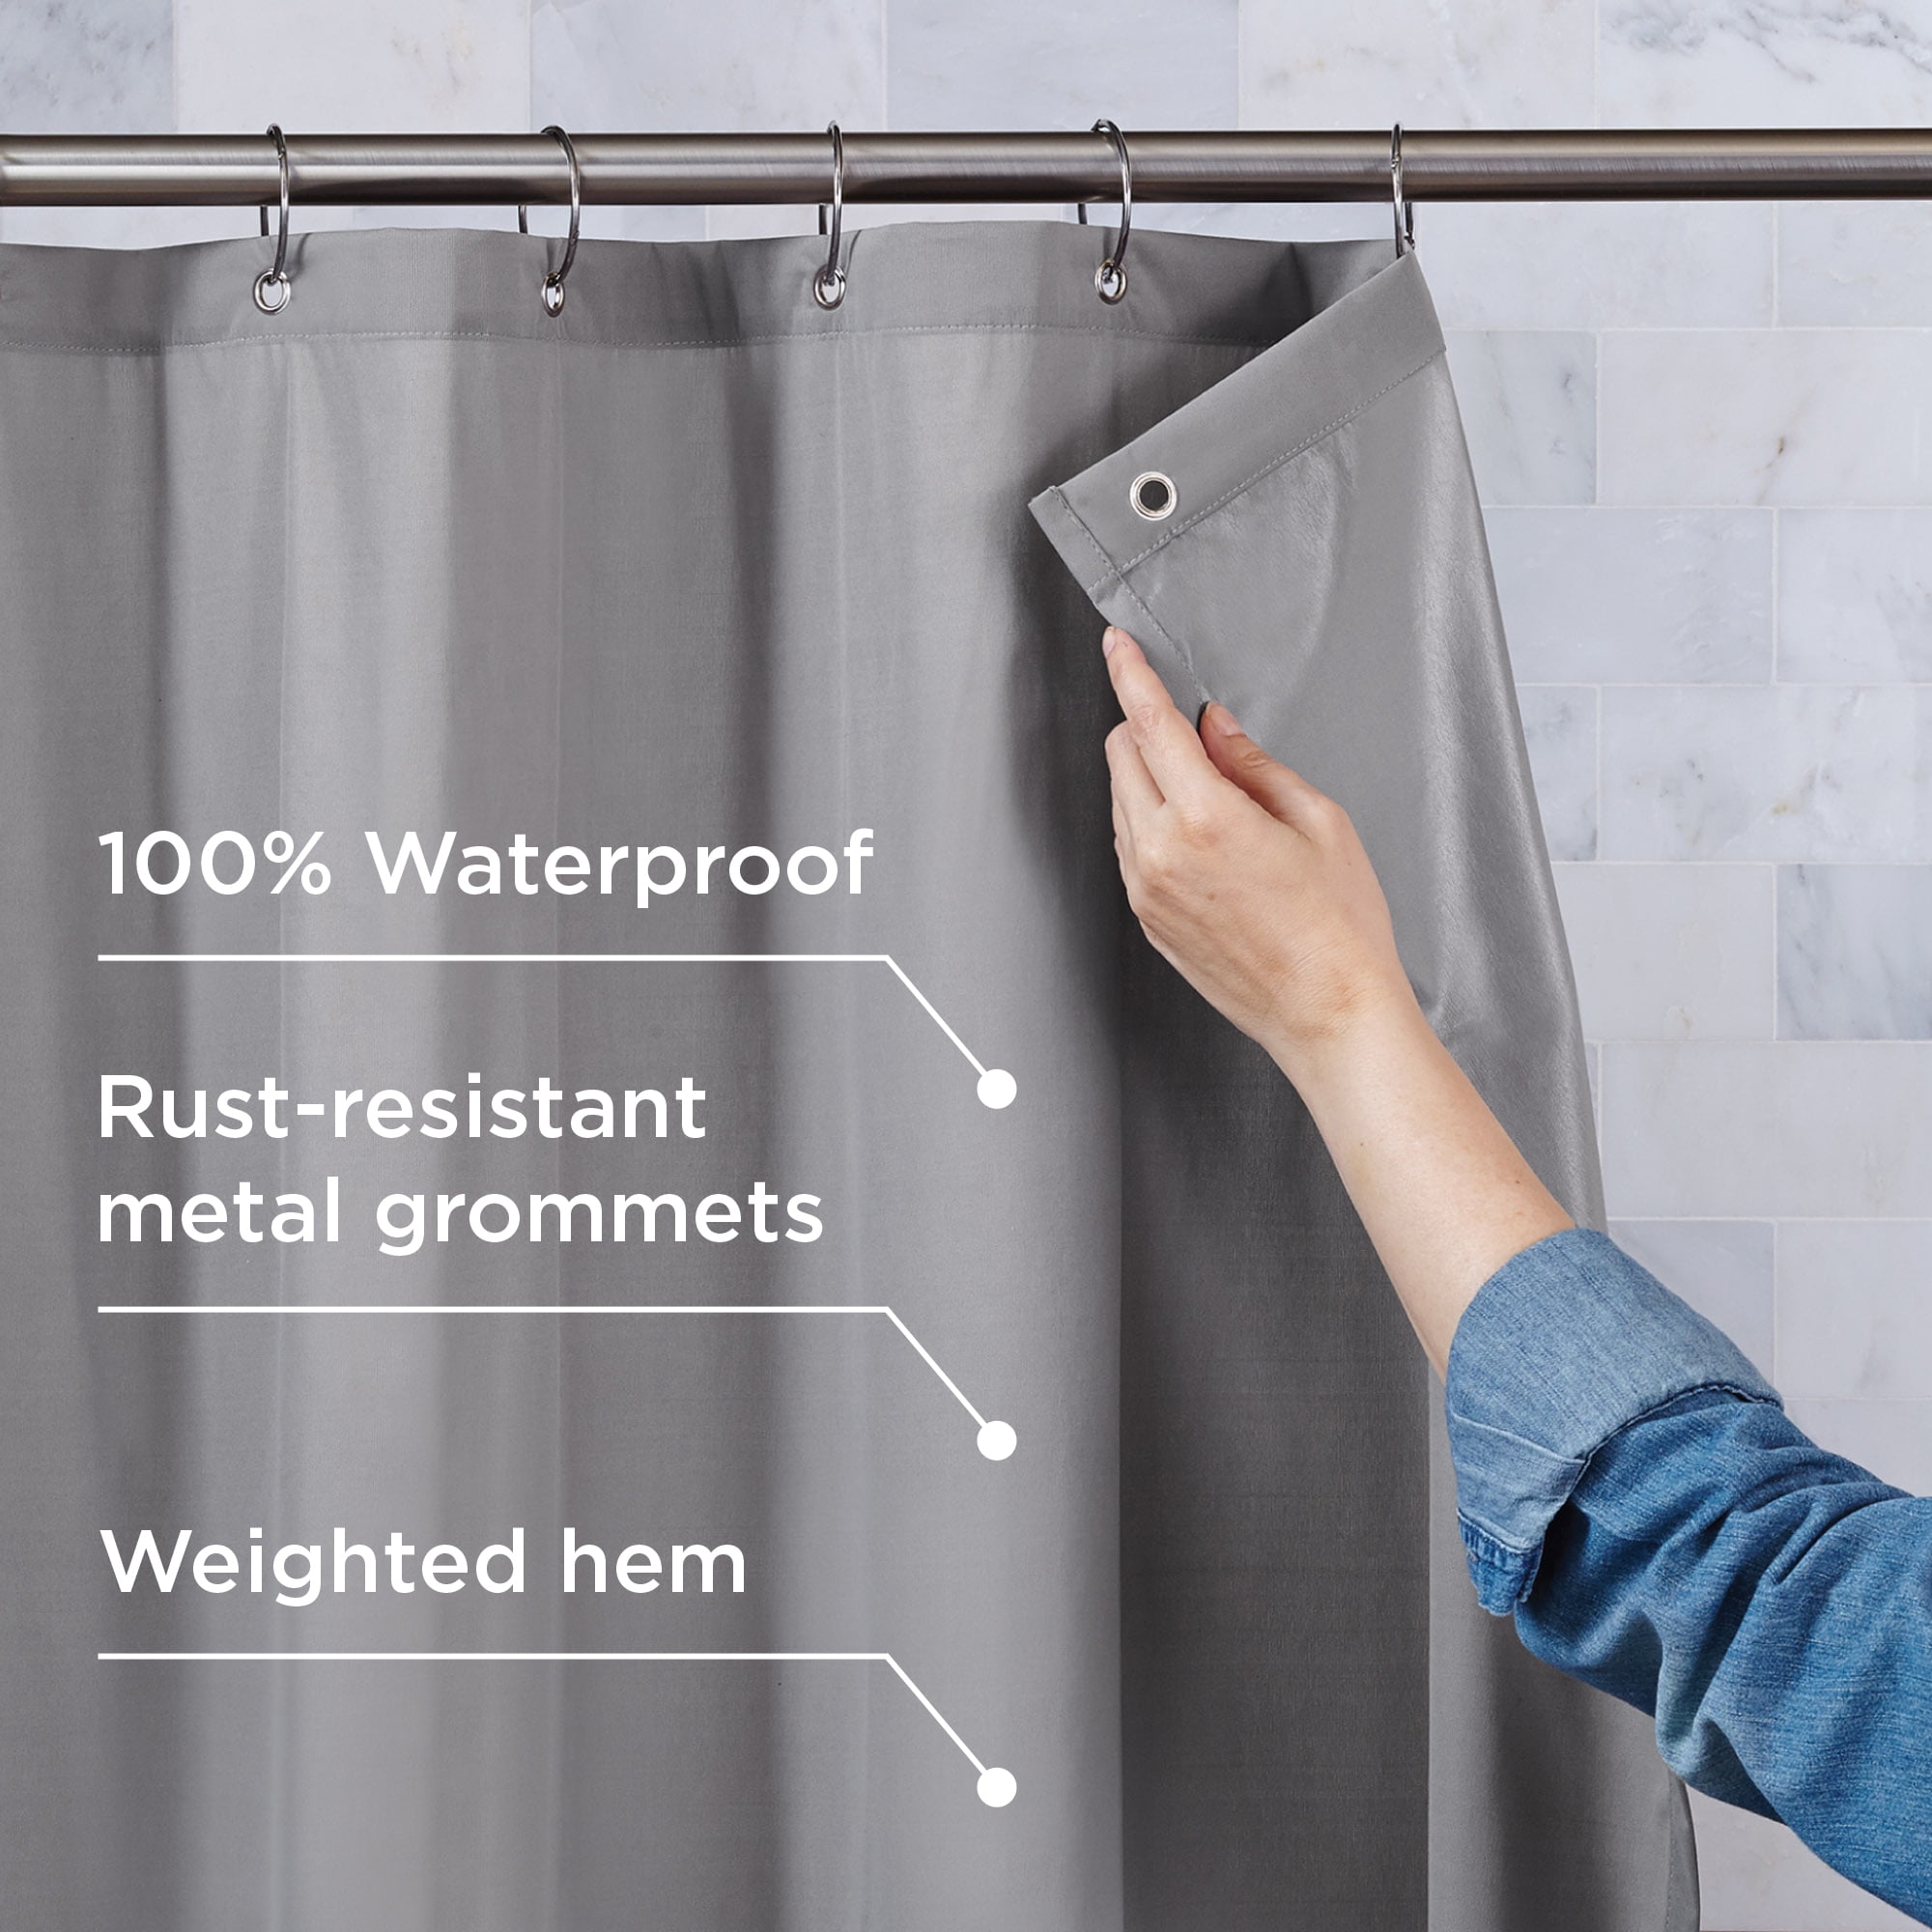 Waterproof Fabric Shower Curtain Or, Can I Use A Fabric Shower Curtain Without Liner